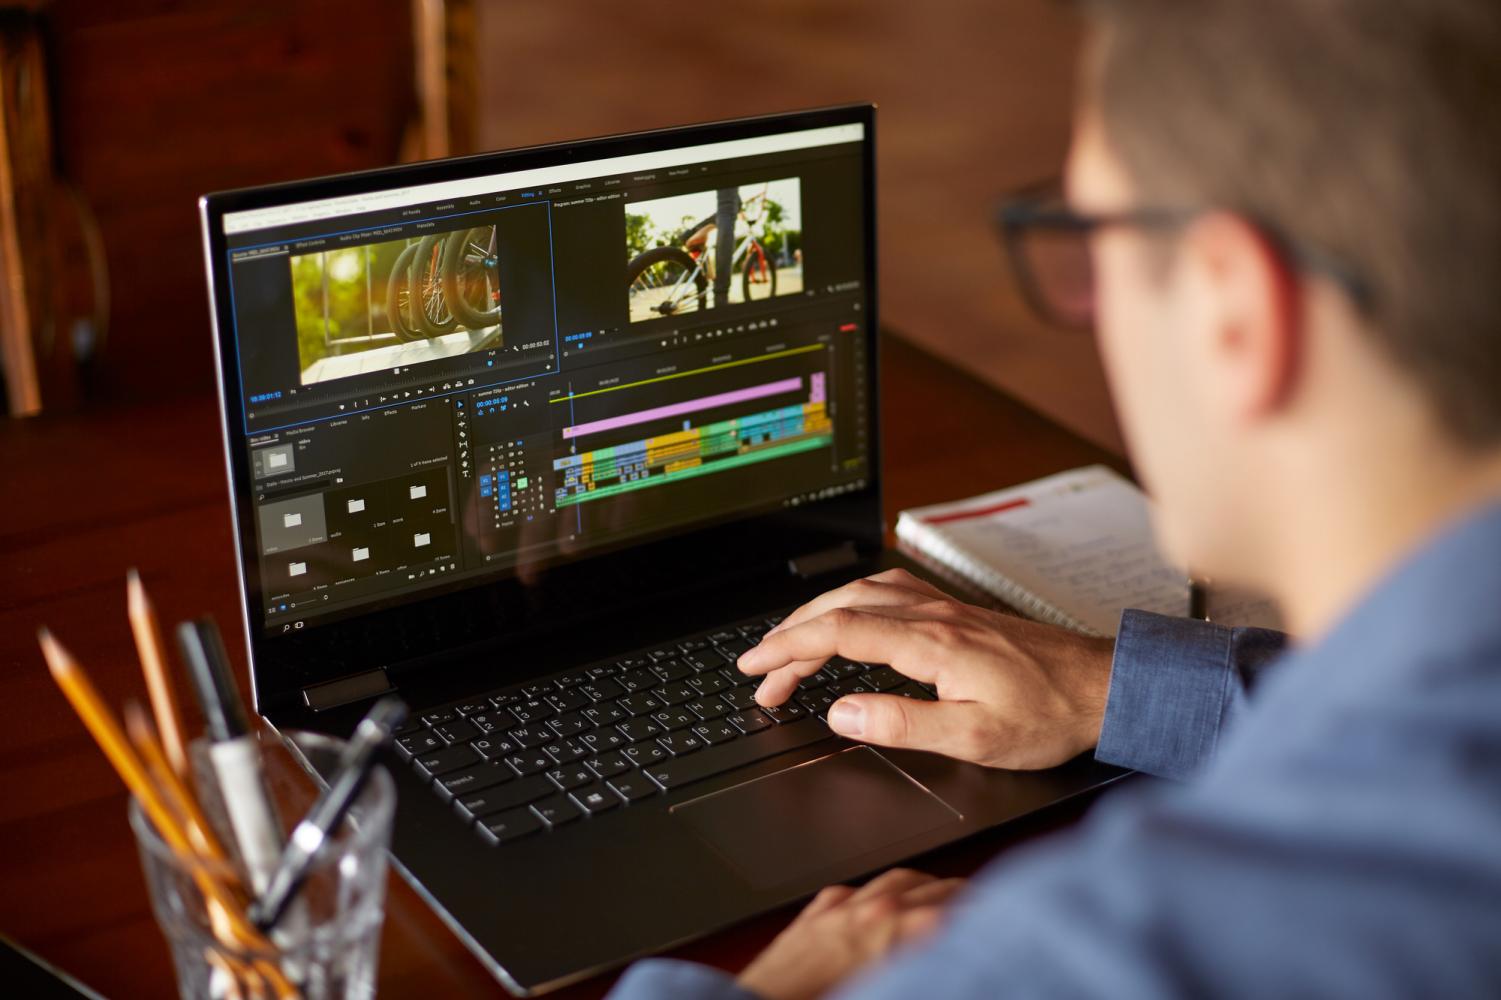 best video editor for pc beginners